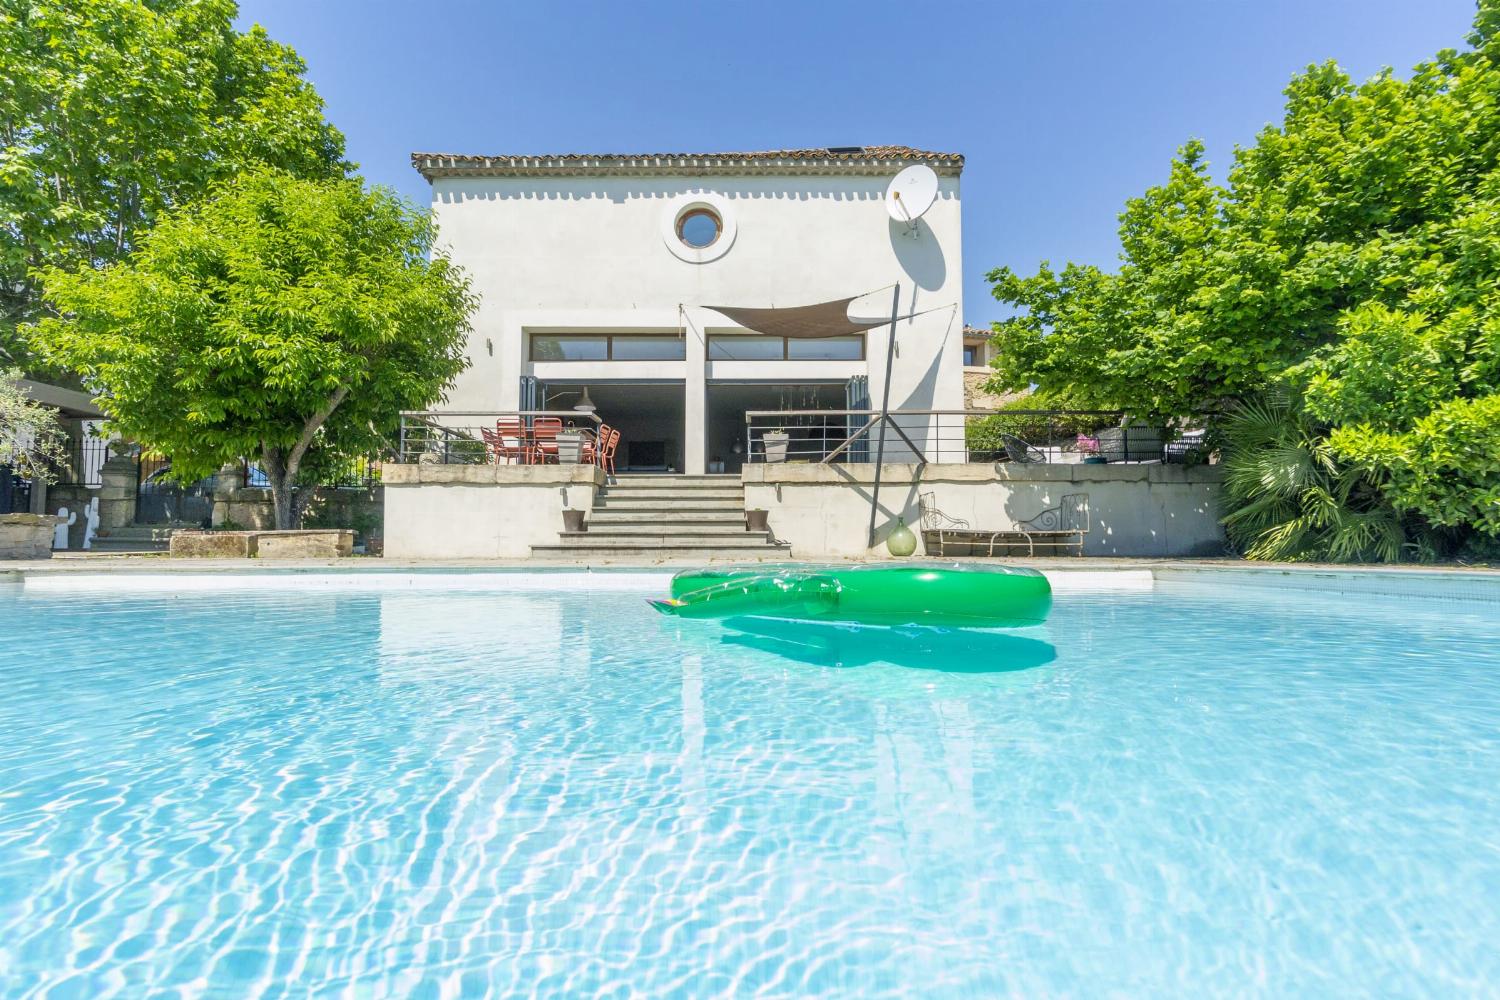 9. La Maison Chapparie: A Beautiful Holiday Home in South of France